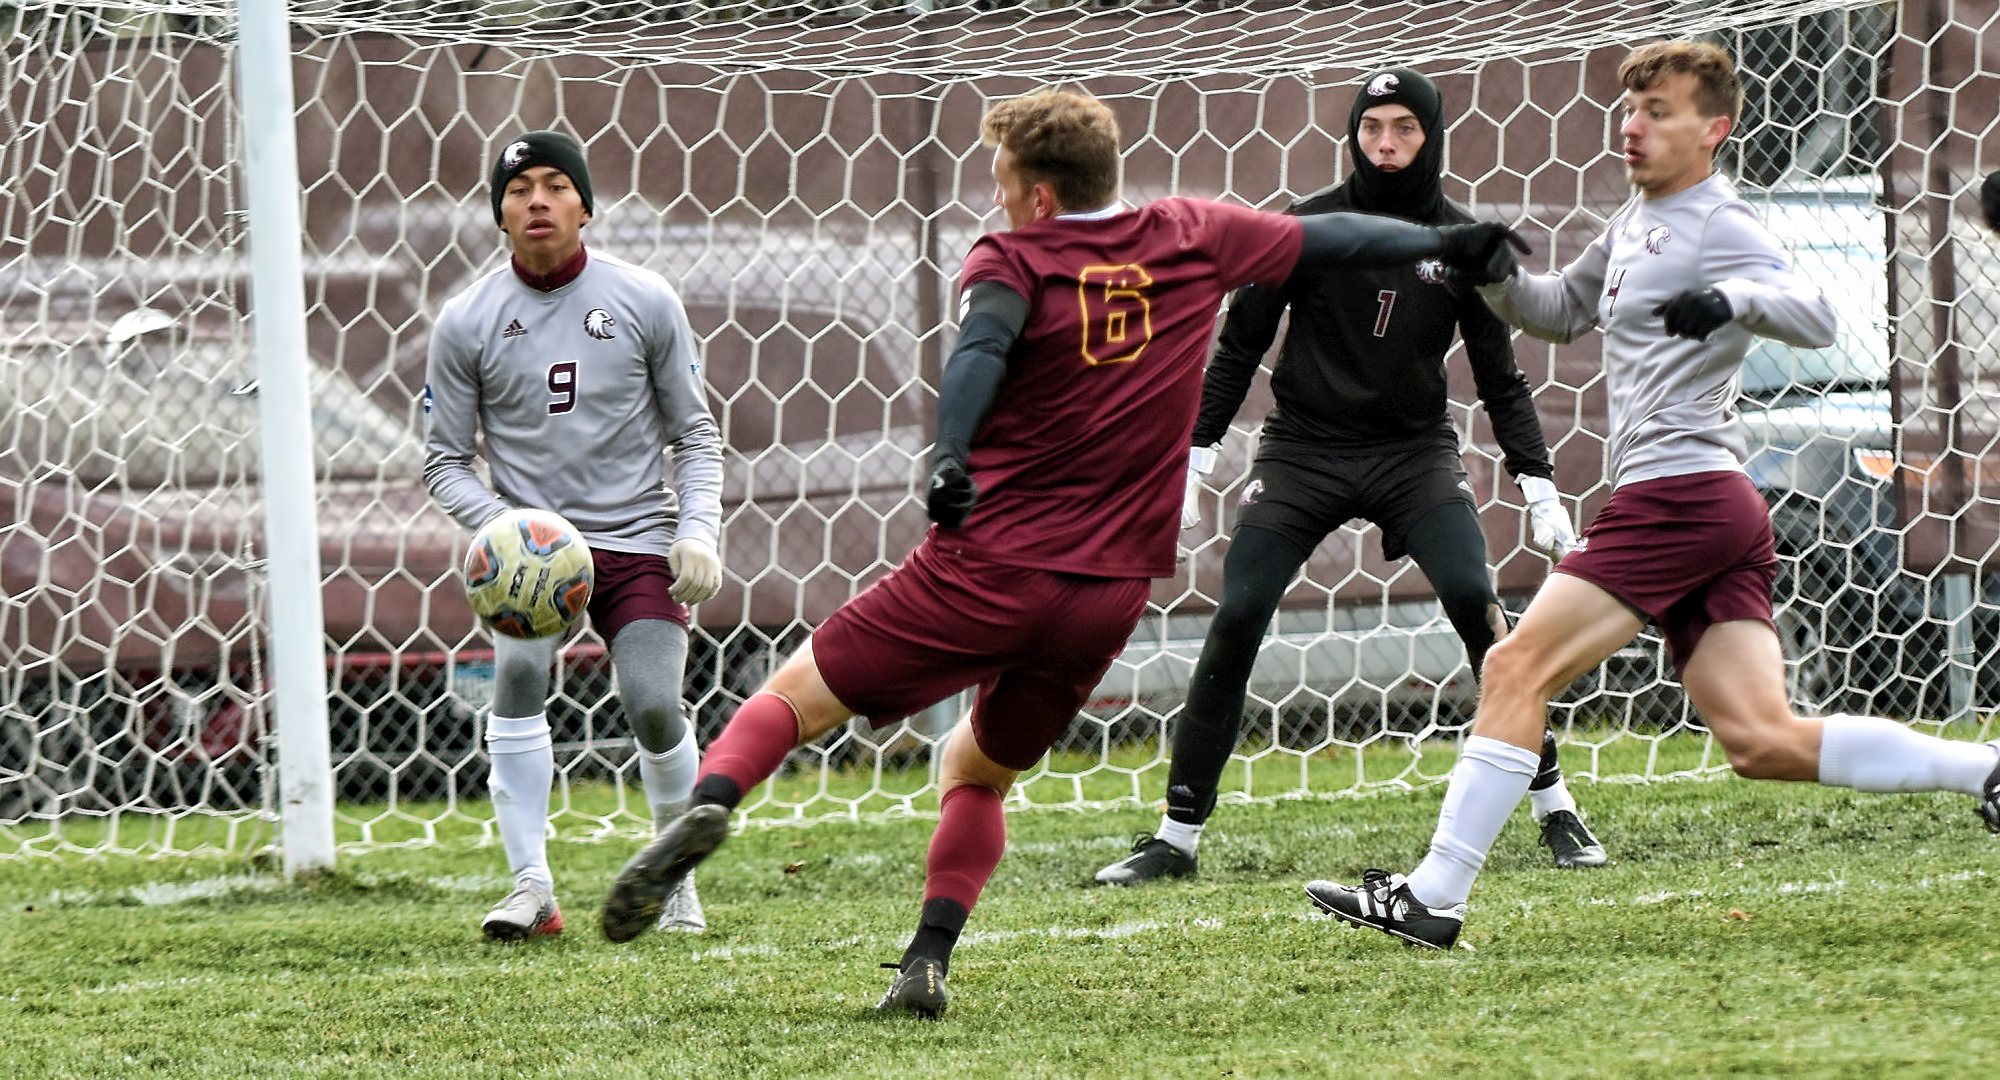 Cobber senior Henry Schaefer gets ready to volley a shot on goal during the second half of the team's game with Augsburg.